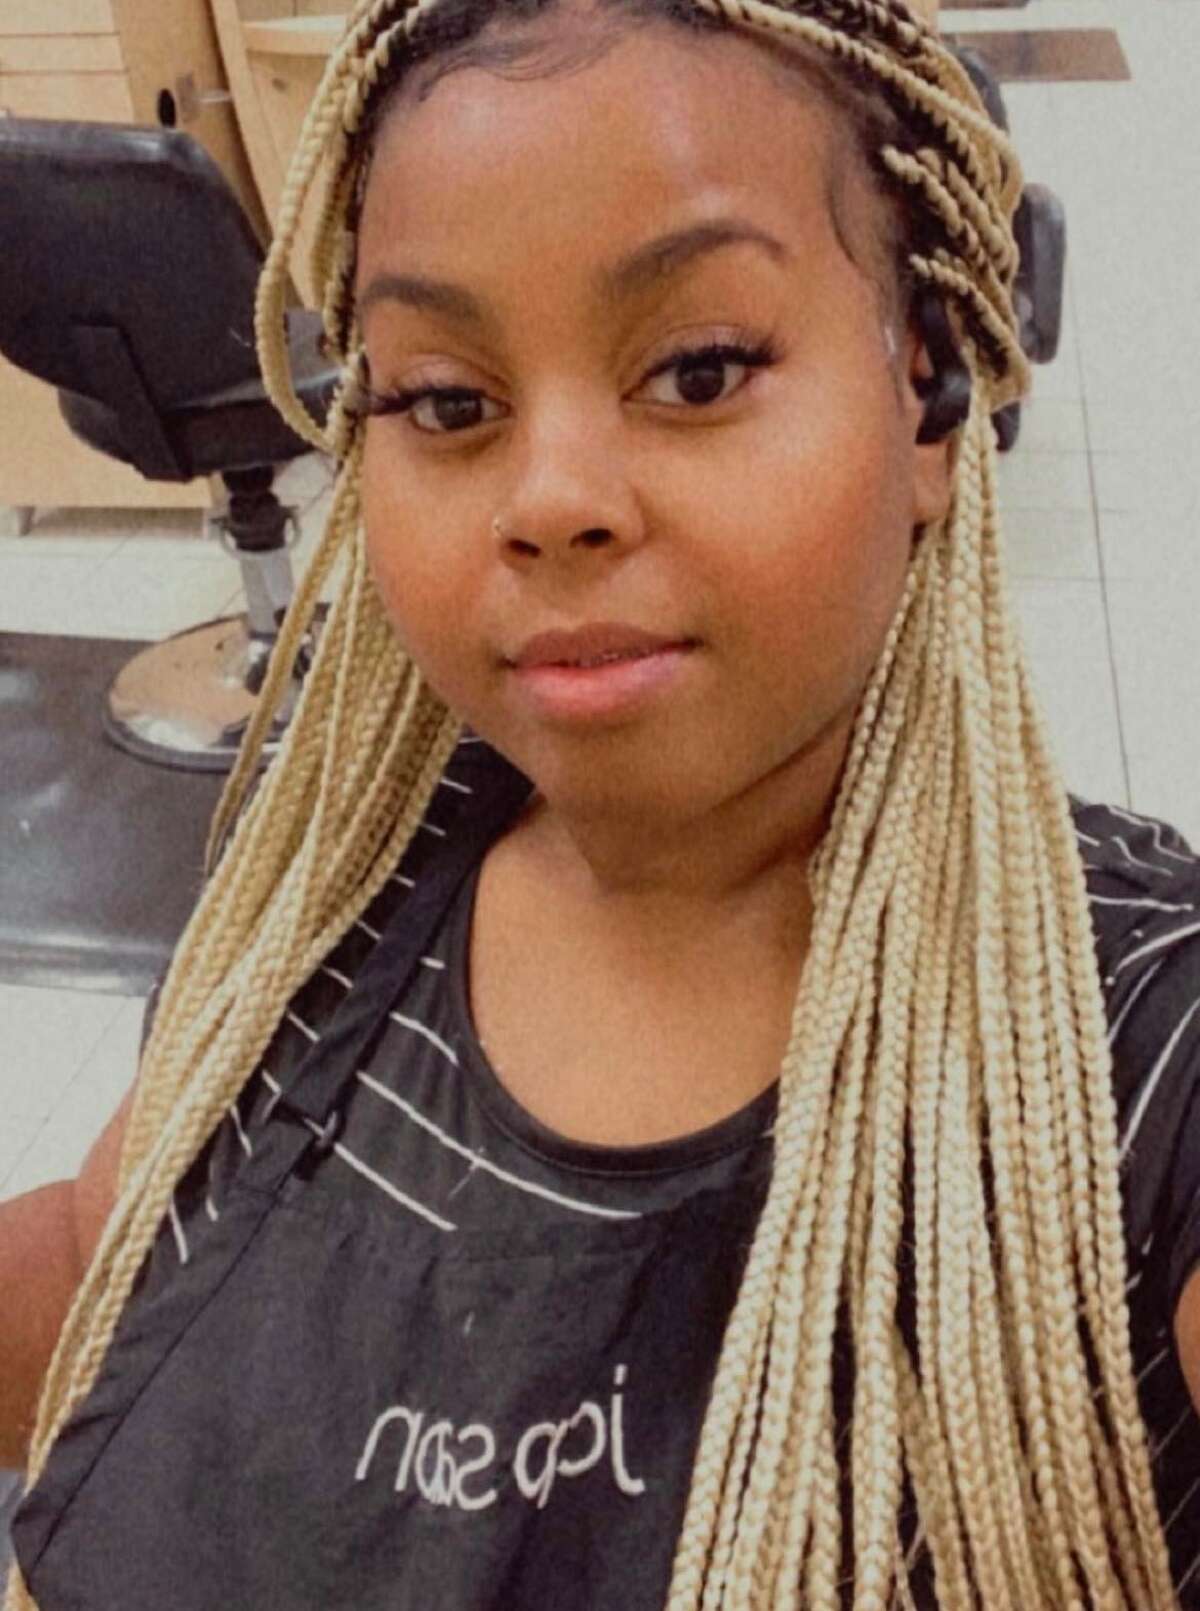 Ebony Gardner (pictured) of Big Rapids began working as a licensed ‘roaming’ hairstylist two years ago with a dream of one day being able to afford her own space and staff. 